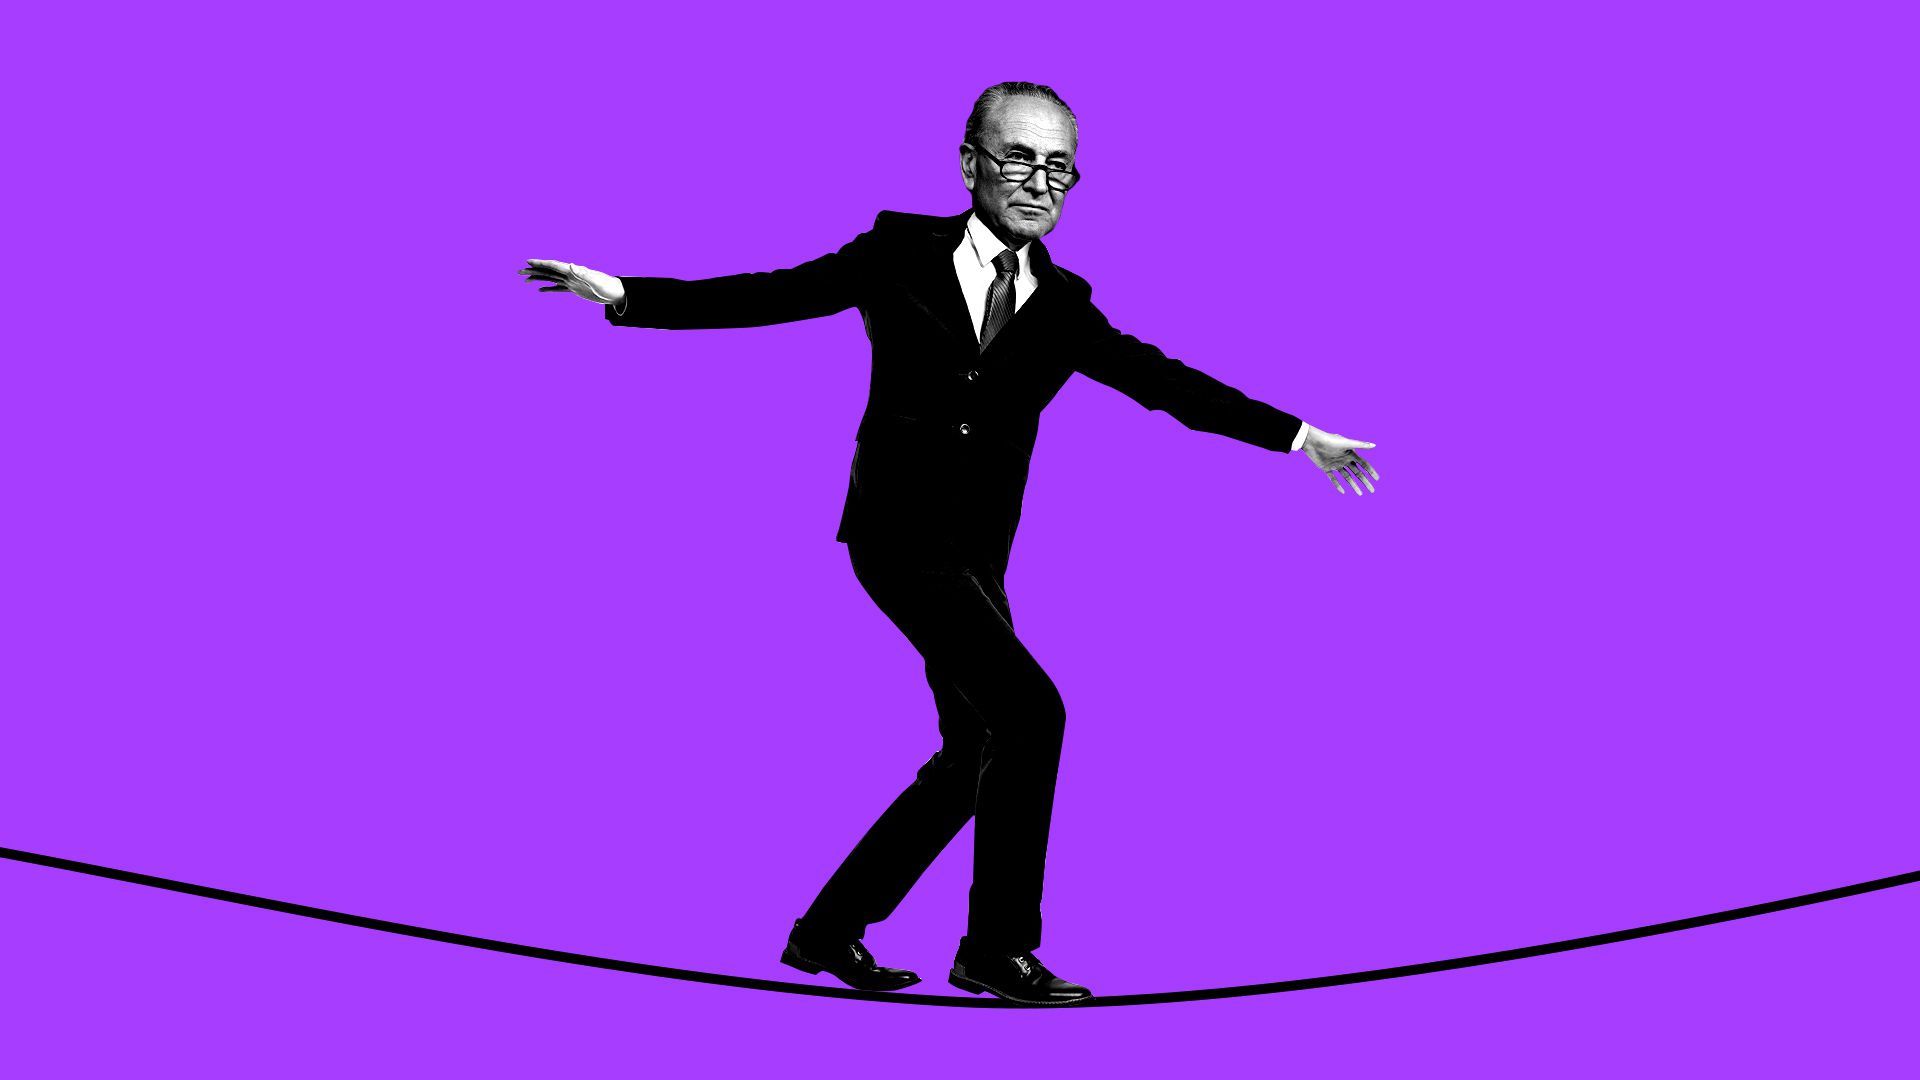 Photo illustration of Chuck Schumer on a tightrope.